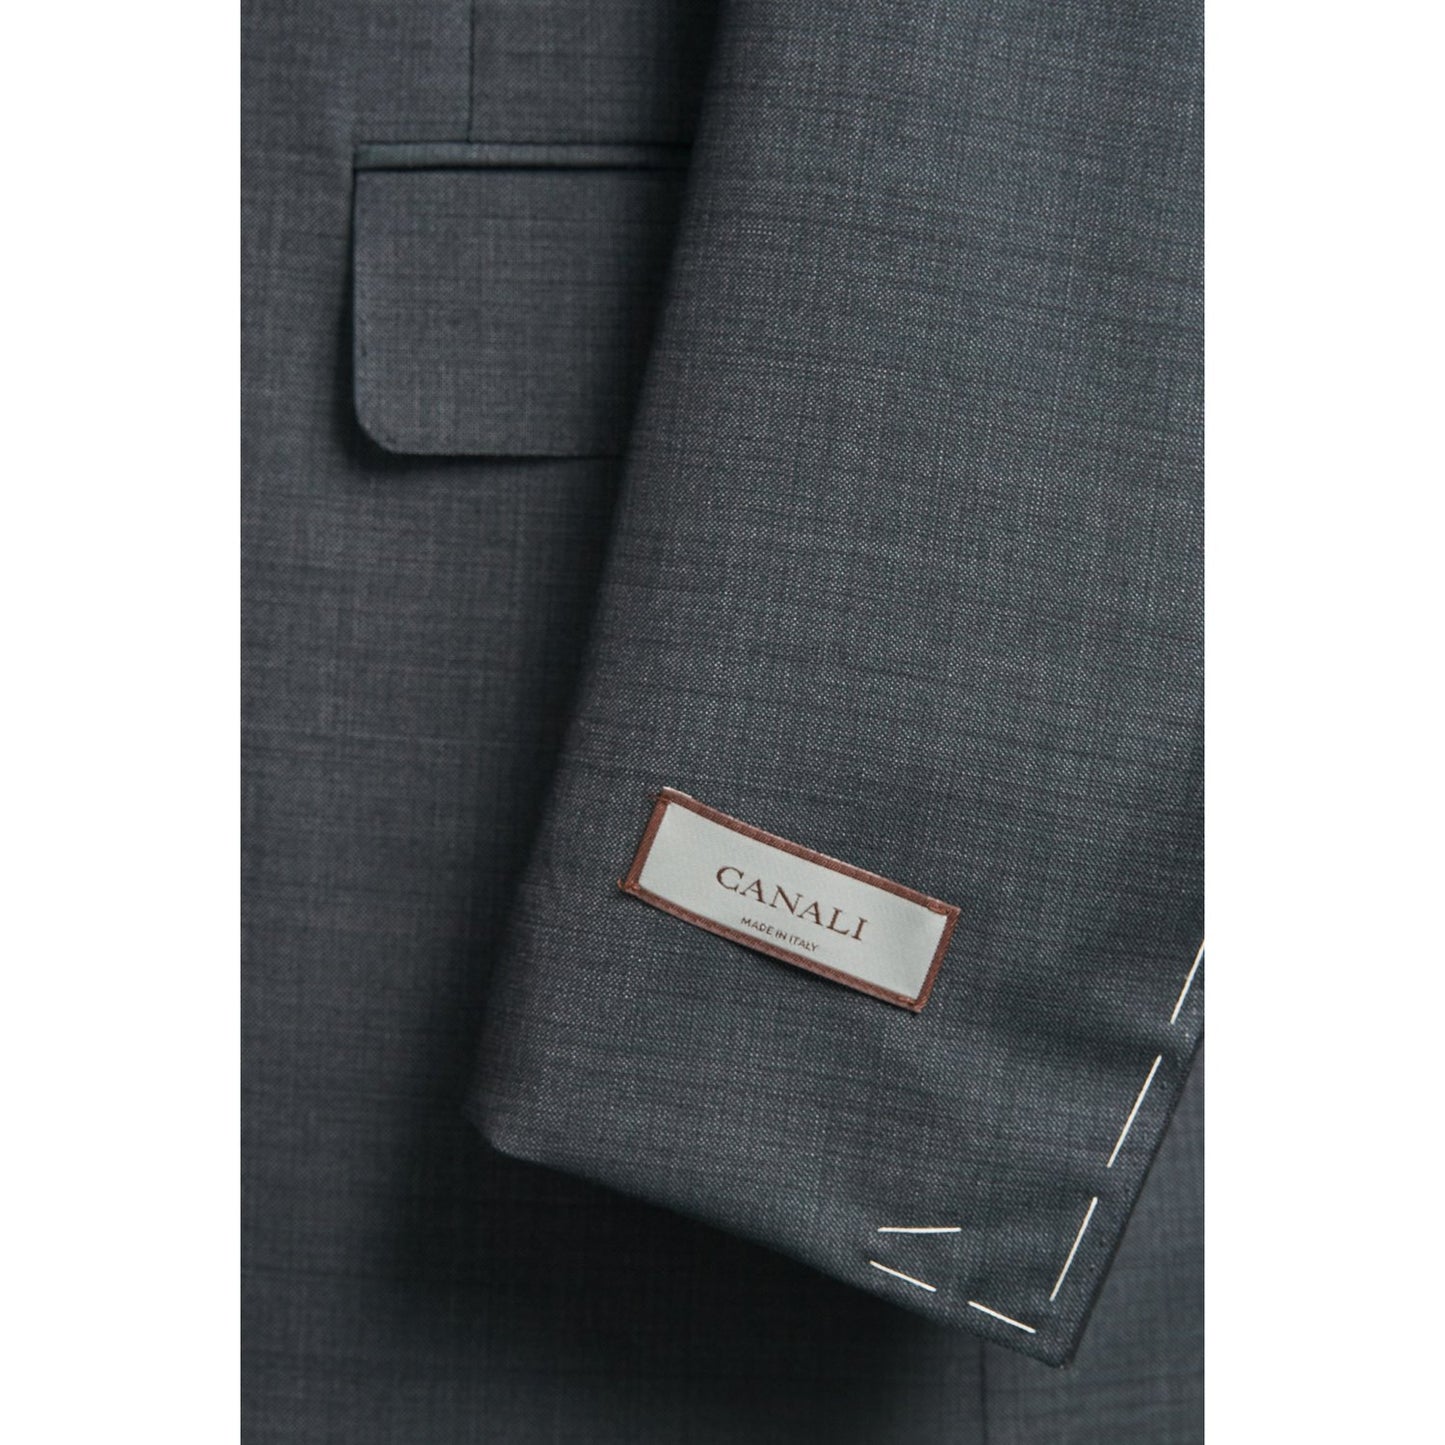 Canali Suit 100% Wool in Grey and Olive